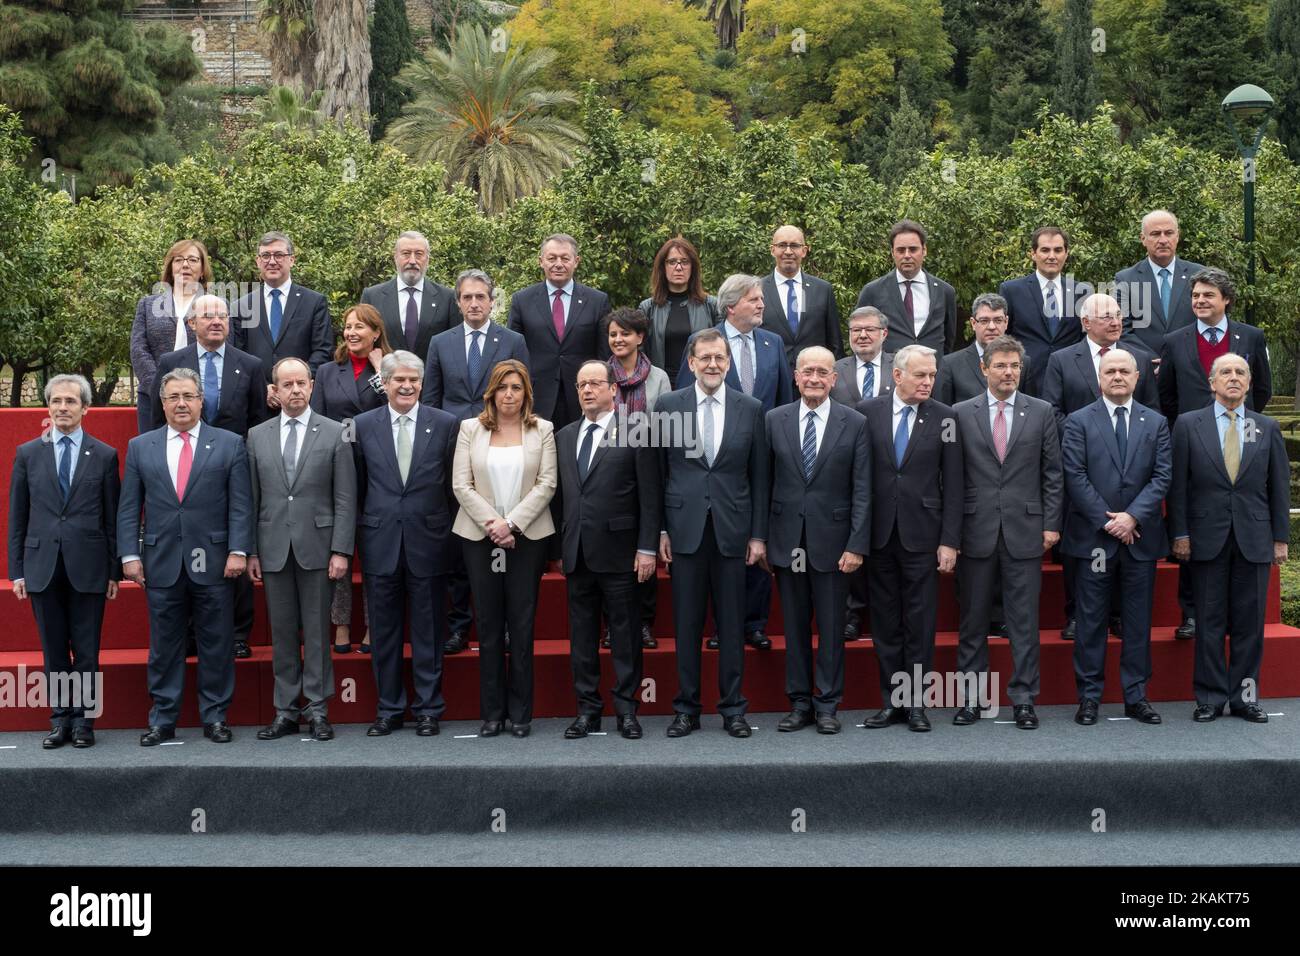 (Front row) Spanish Prime Minister Mariano Rajoy (CR) and President of the French Republic Francois Hollande (CL) pose for a family photo flanked by President of Andalusian regional government Susana Diaz (5L), Mayor of Malaga Francisco de la Torre (5R) , Spanish Interior Minister Juan Ignacio Zoido (2L), French Justice Minister Jean-Jacques Urvoas (3L), Spanish Minister of Foreign Affairs Alfonso Maria Dastis (4L), French Foreign Minister Jean-Marc Ayrault (4R), Spanish Minister of Justice Rafael Catala (3R), le French Interior Minister Bruno Le Roux (2R), (middle row) Spanish Minister of Eco Stock Photo